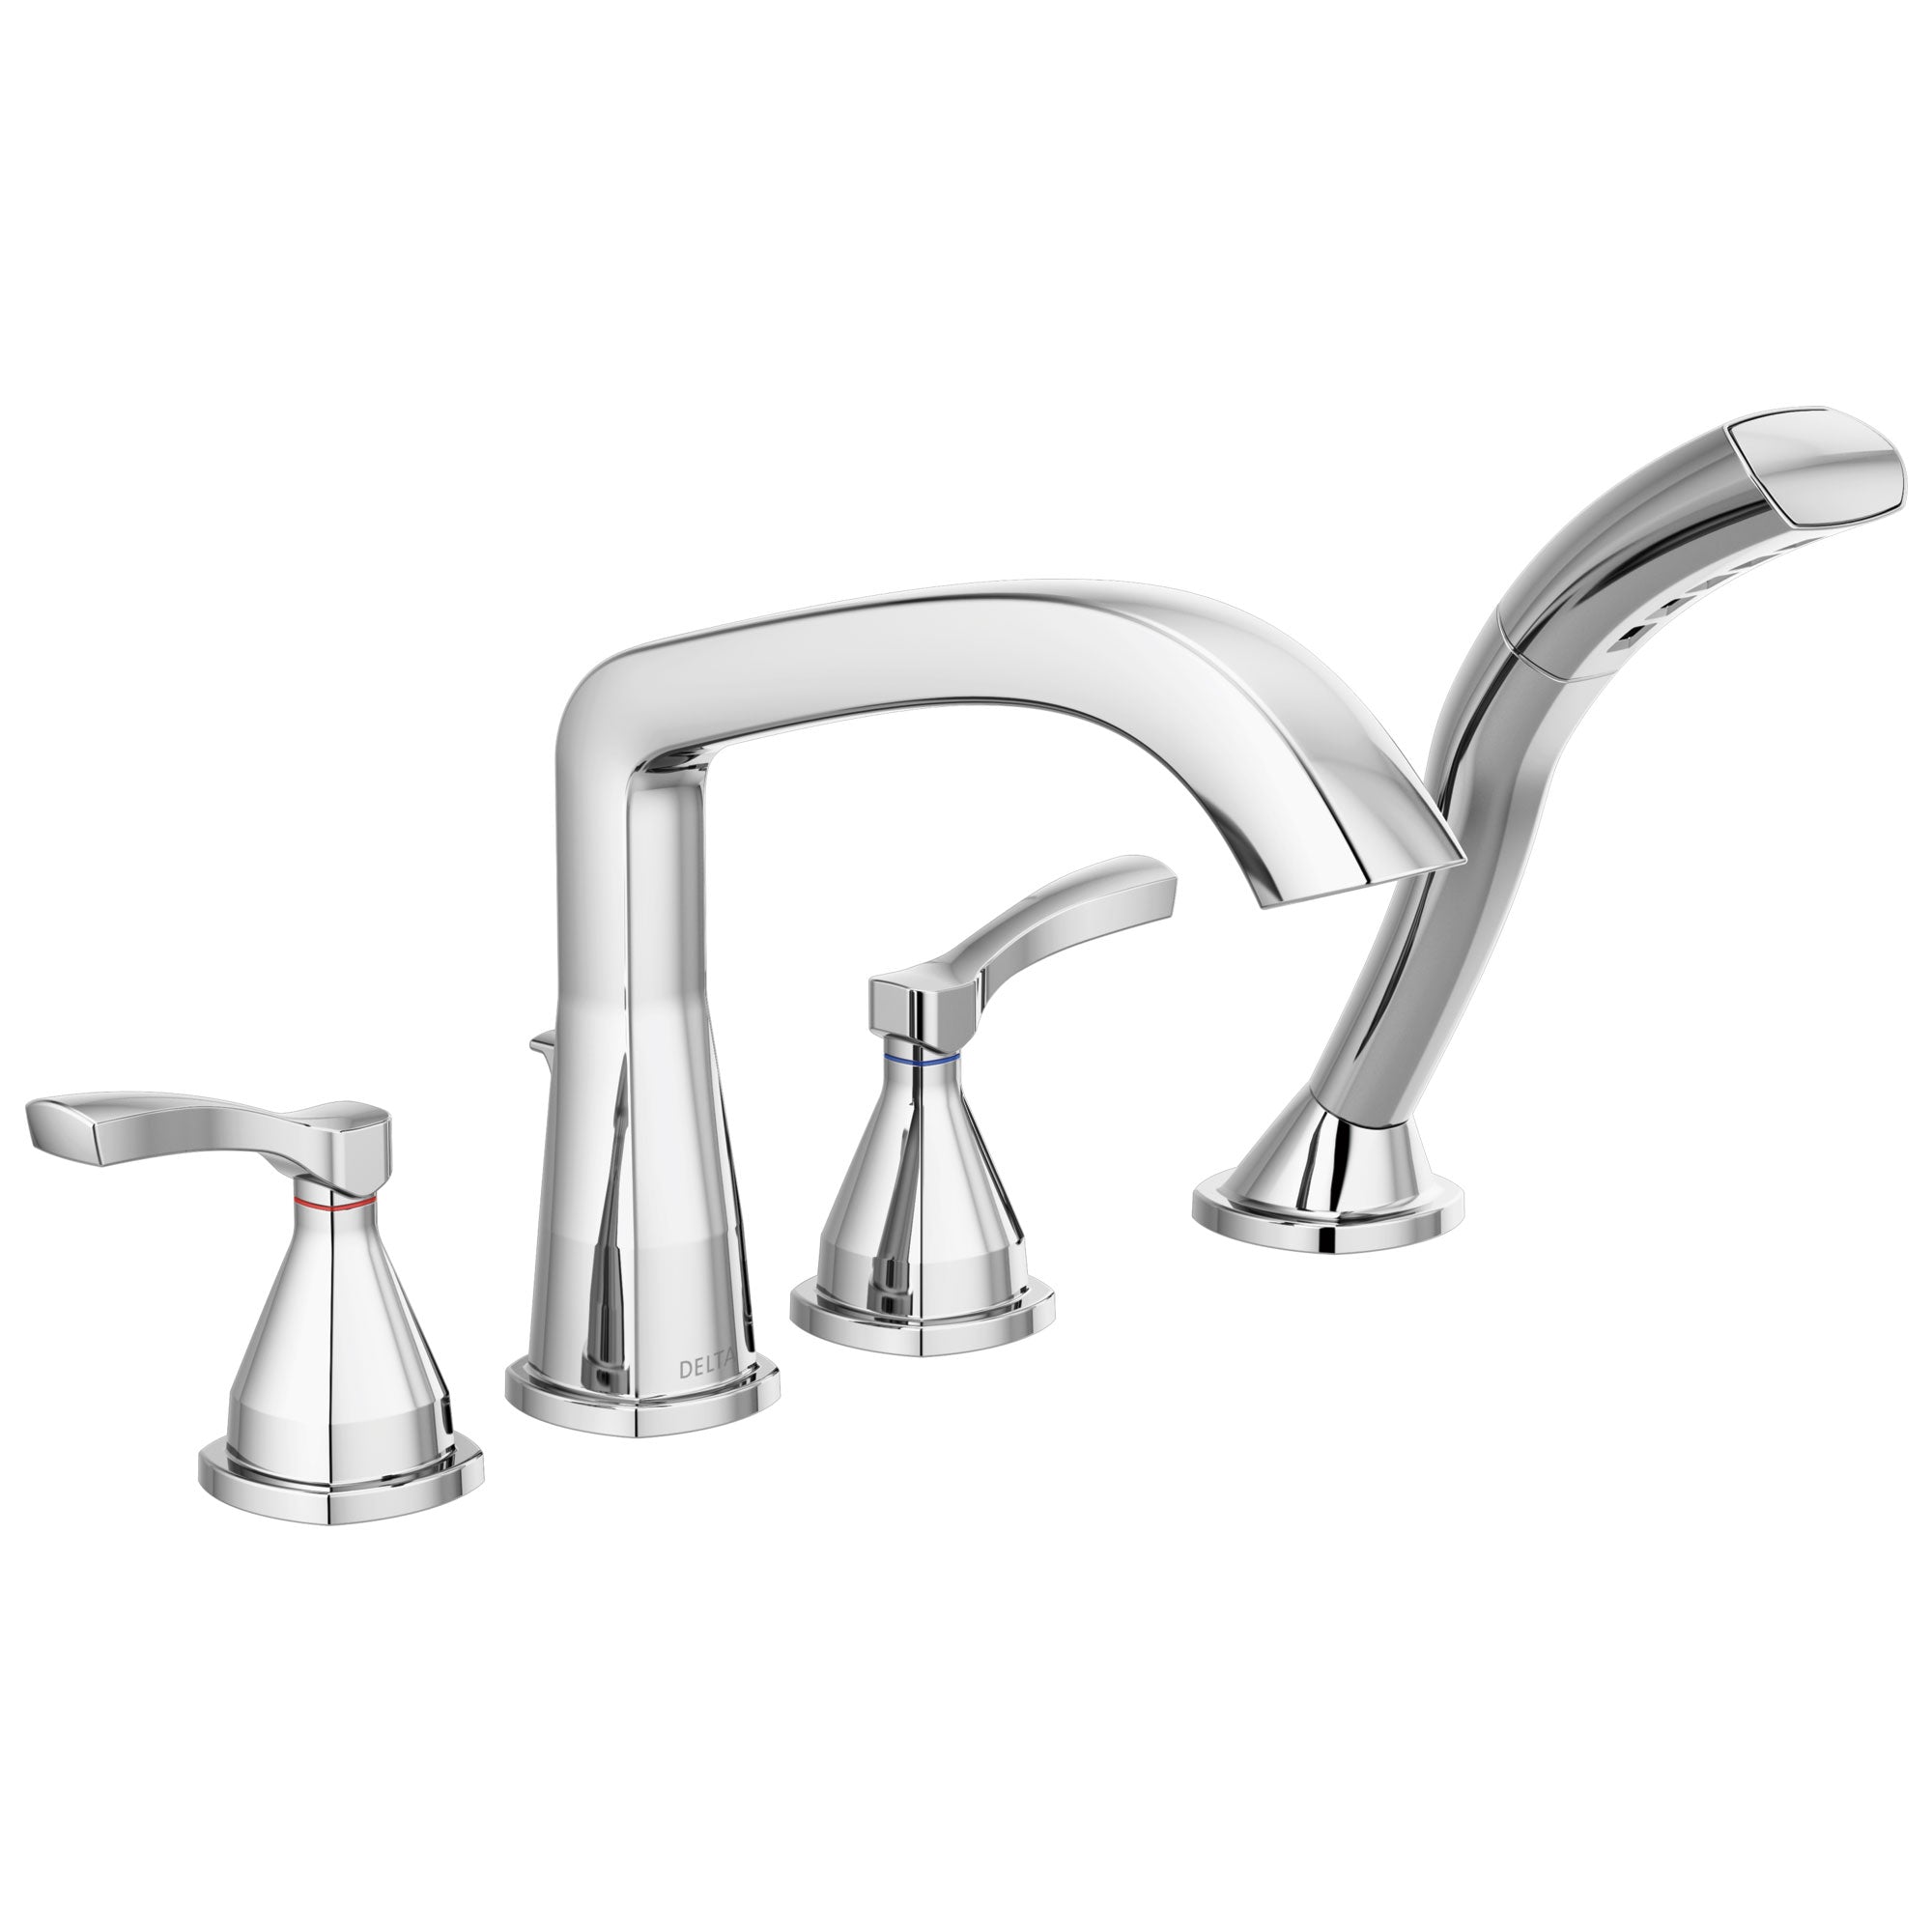 Delta Stryke Chrome Finish Deck Mount Roman Tub Filler Faucet with Hand Shower Includes Rough-in Valve and Lever Handles D3050V